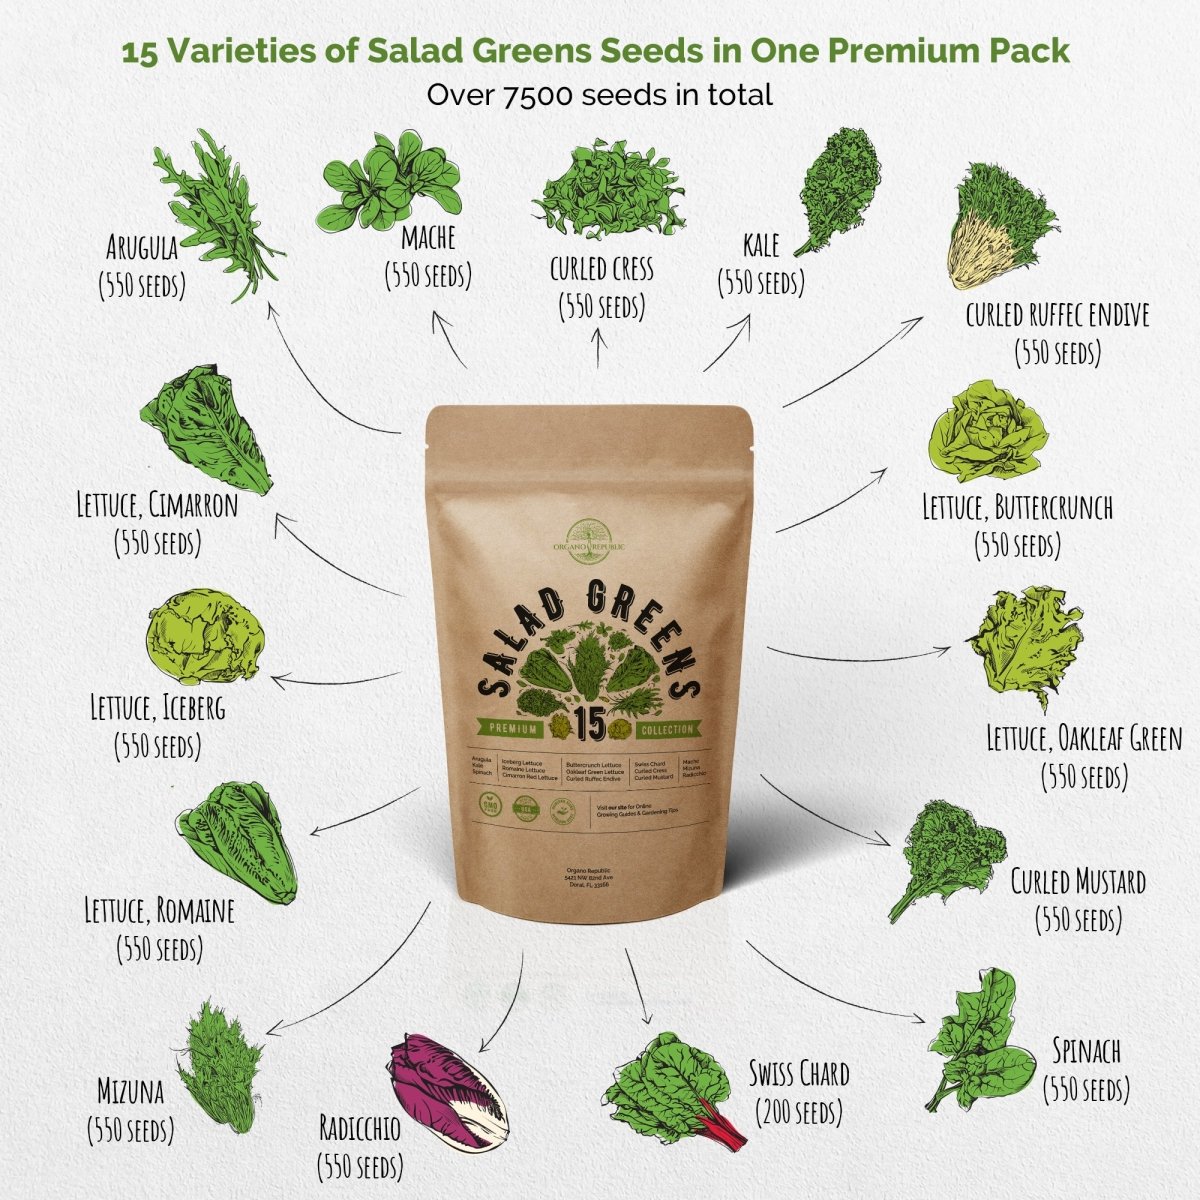 15 Lettuce & Salad Greens Seeds Variety Pack - Over 7500 Non-GMO, Heirloom Seeds - Organo Republic